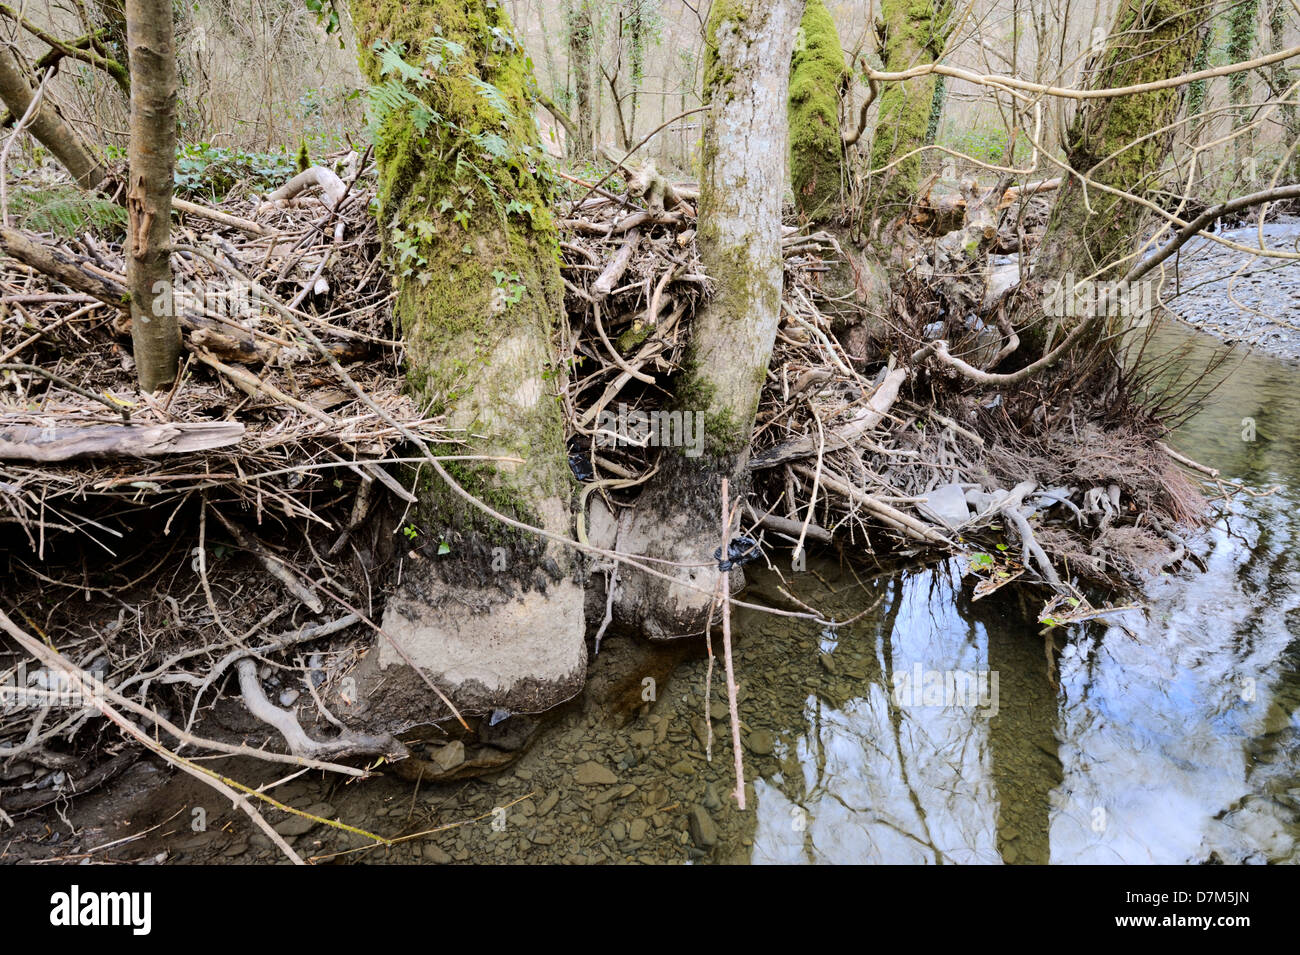 Woody debris deposited by floodwater and trapped amongst riverside trees, River Wyre, Wales, UK. Stock Photo